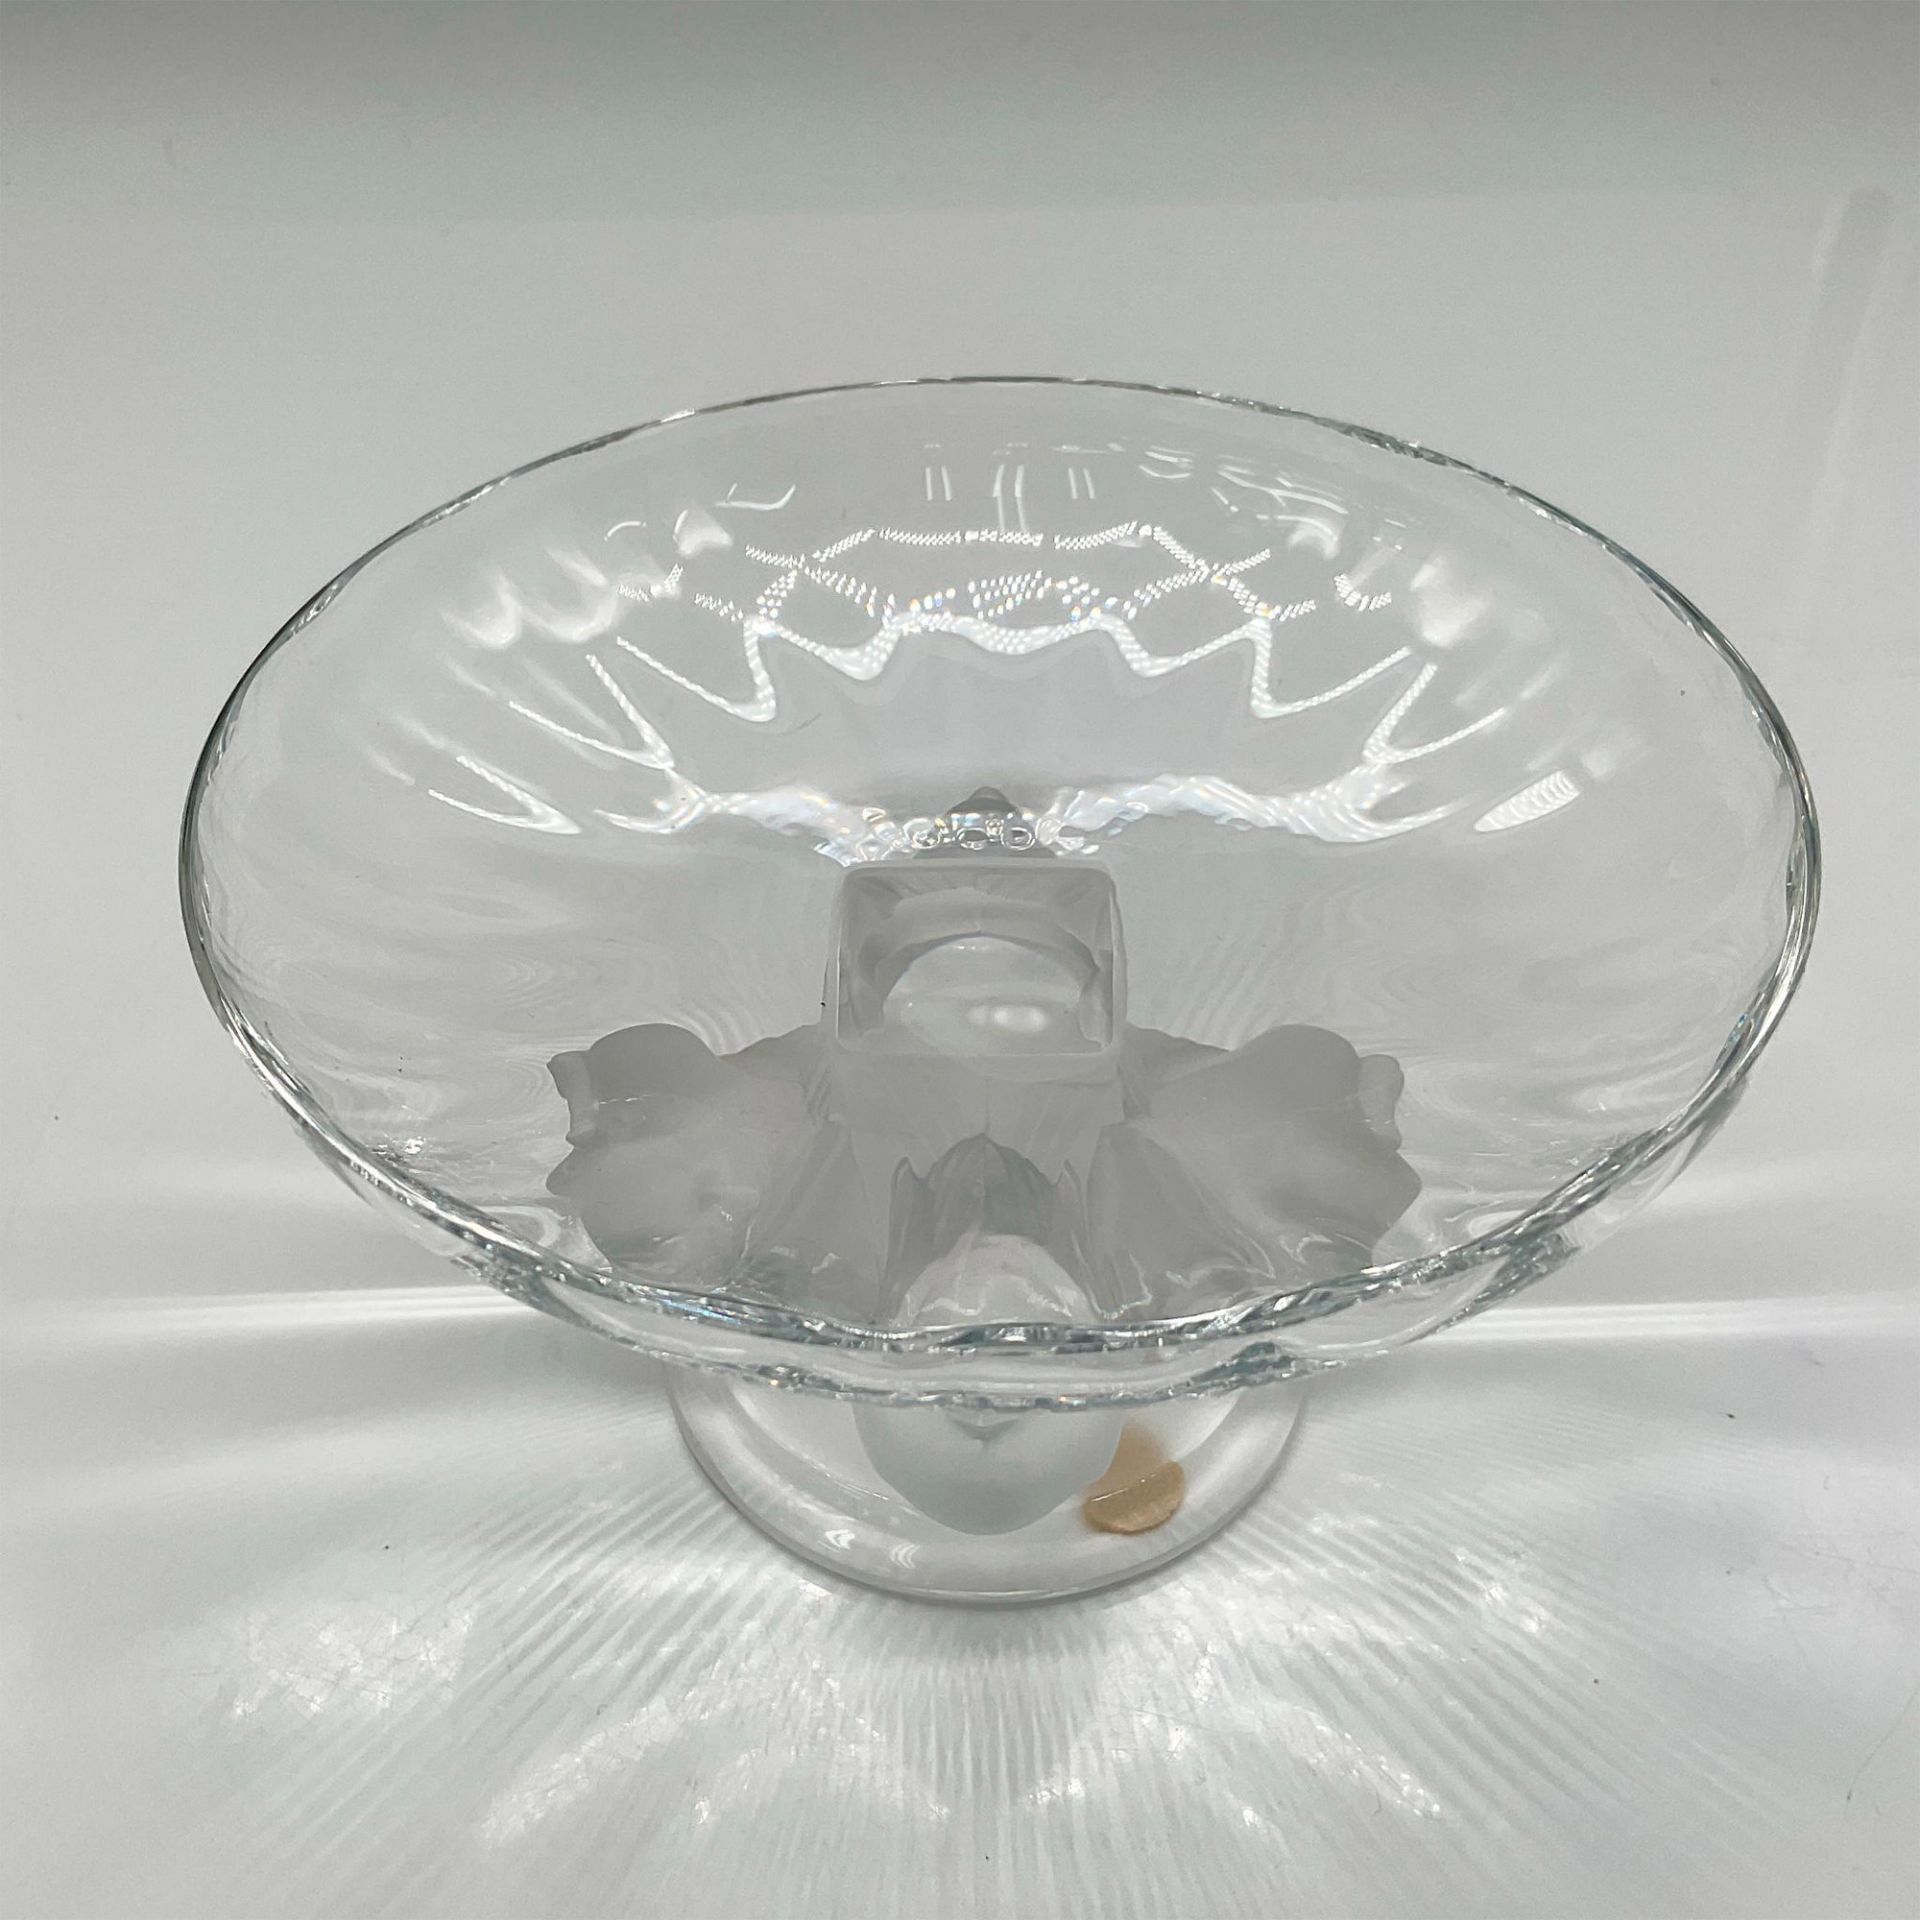 Lalique Crystal Footed Bowl, Nogent - Image 2 of 4